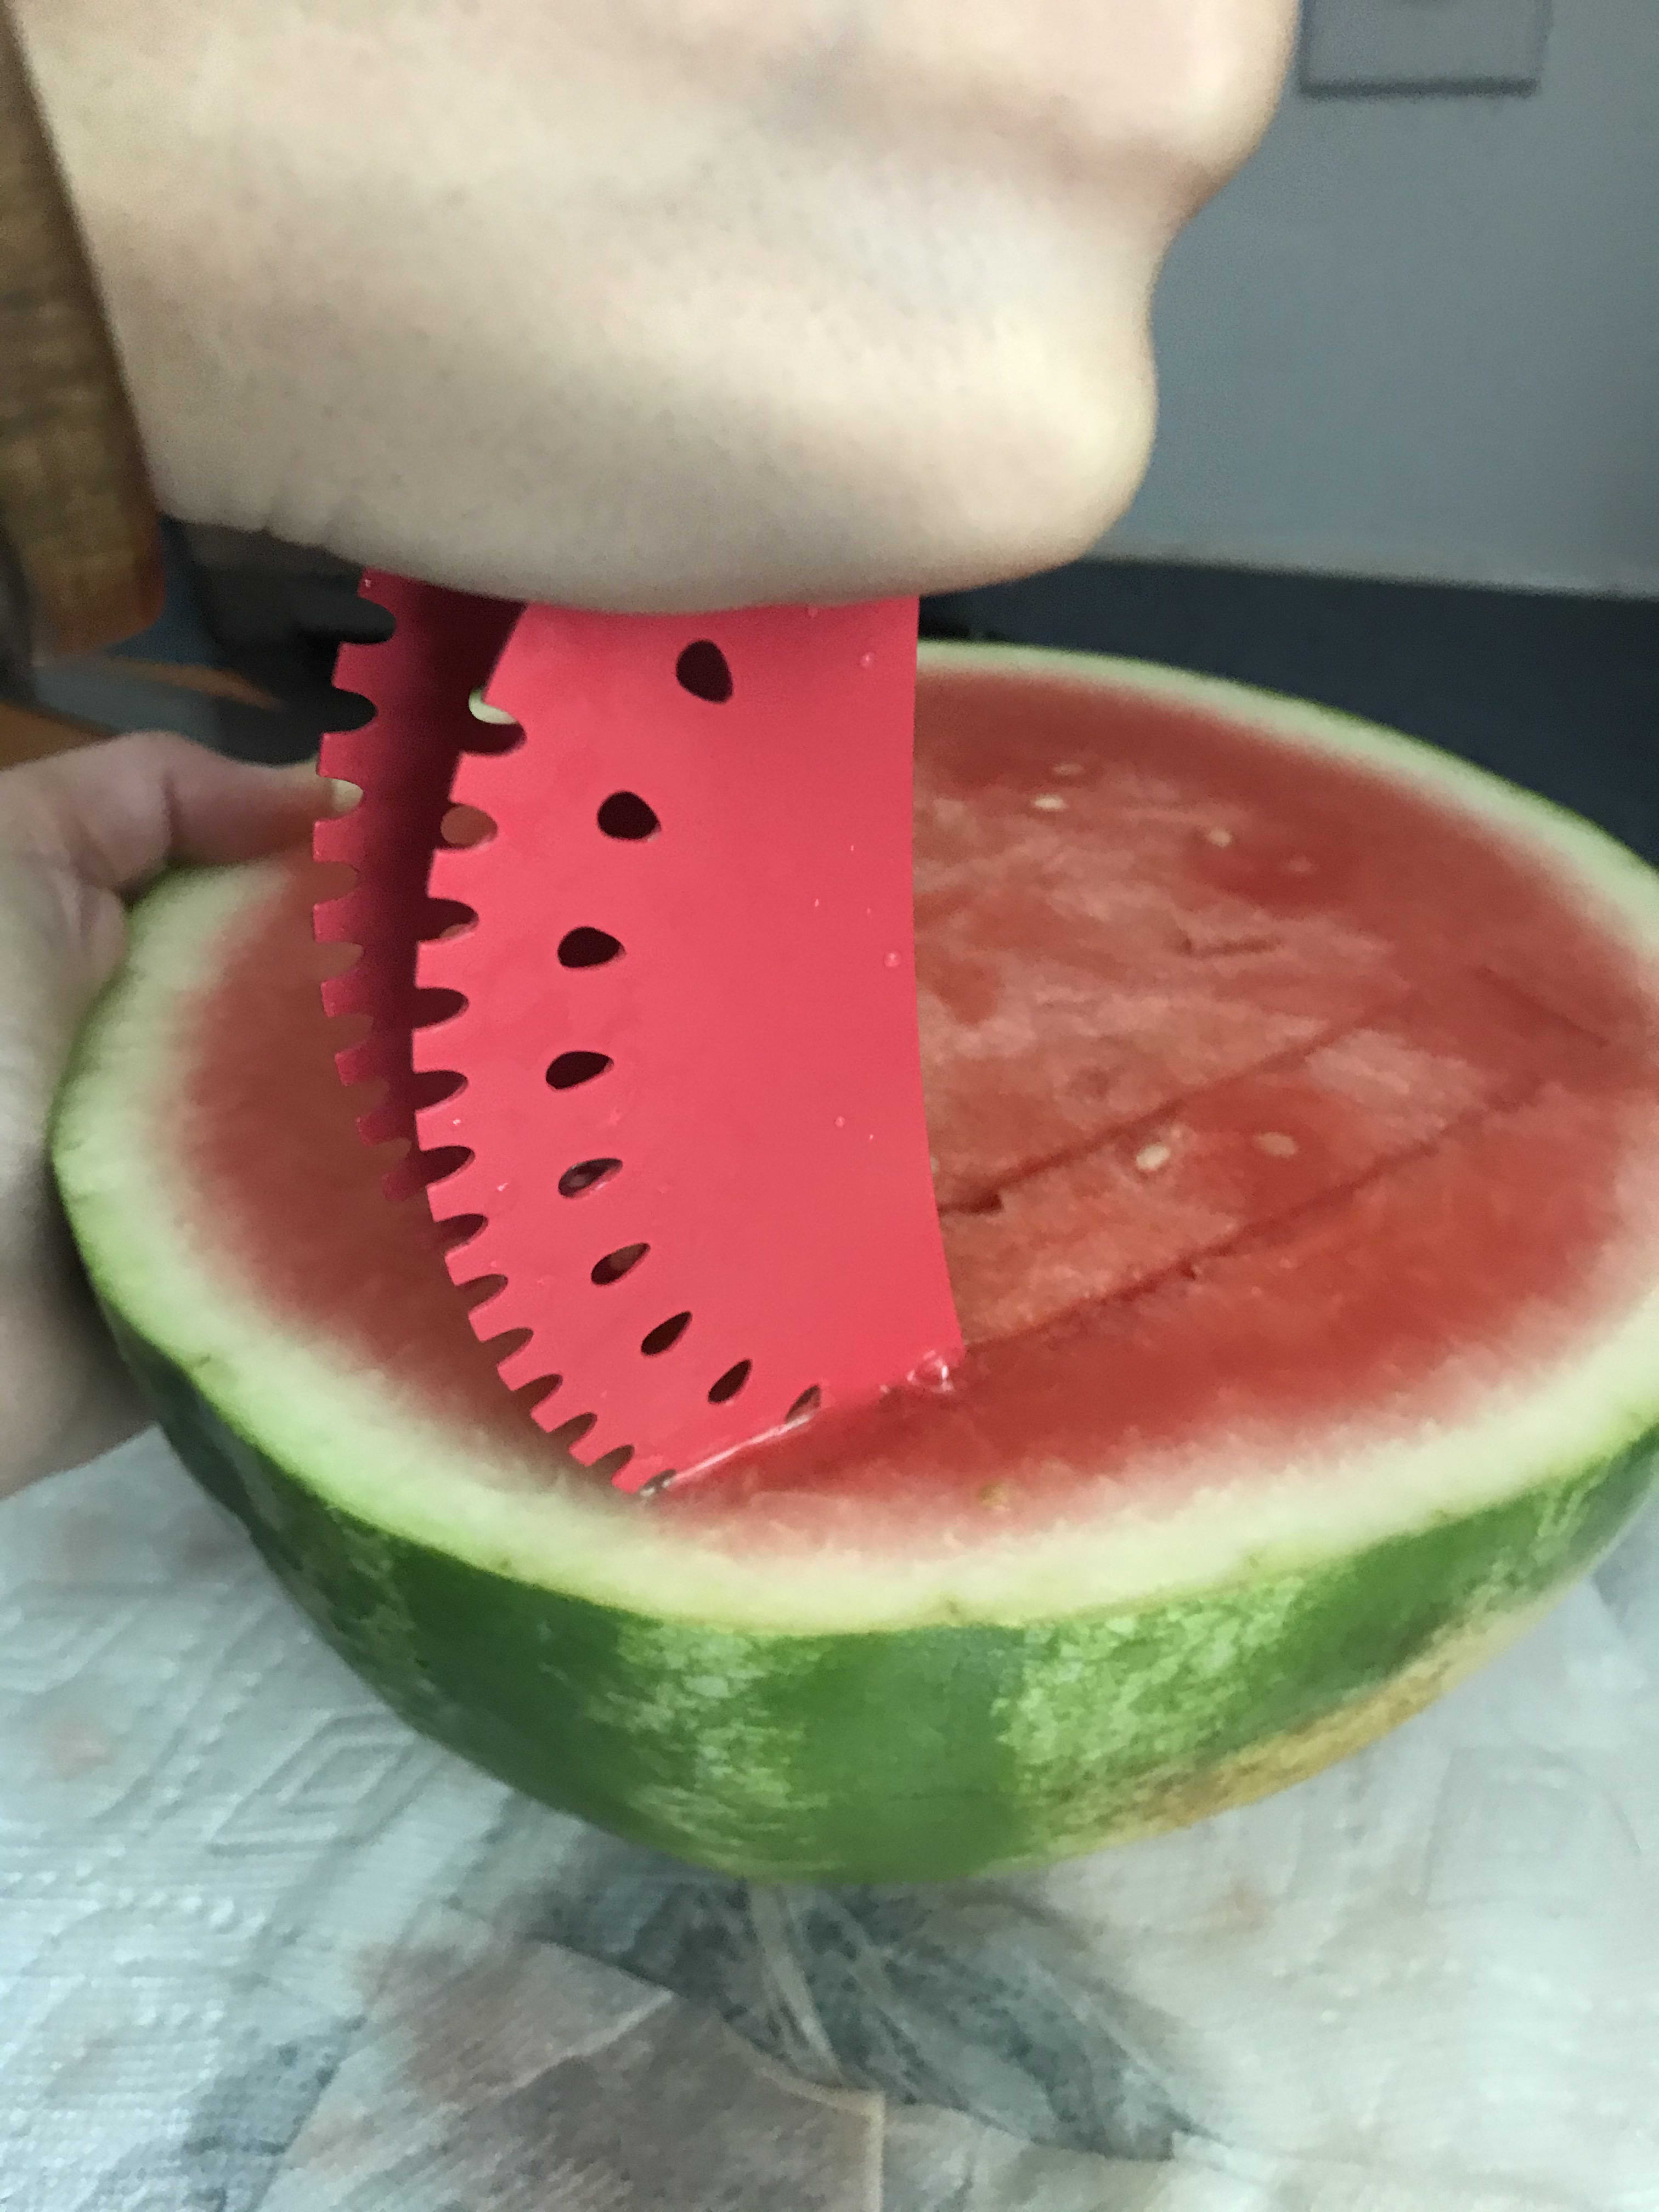 Durable No Fruit Cutter, Perfectly Safe No Smell Fruit Cutting  Tool Watermelon Knife, for Chefs for Housewifes(green): Knives